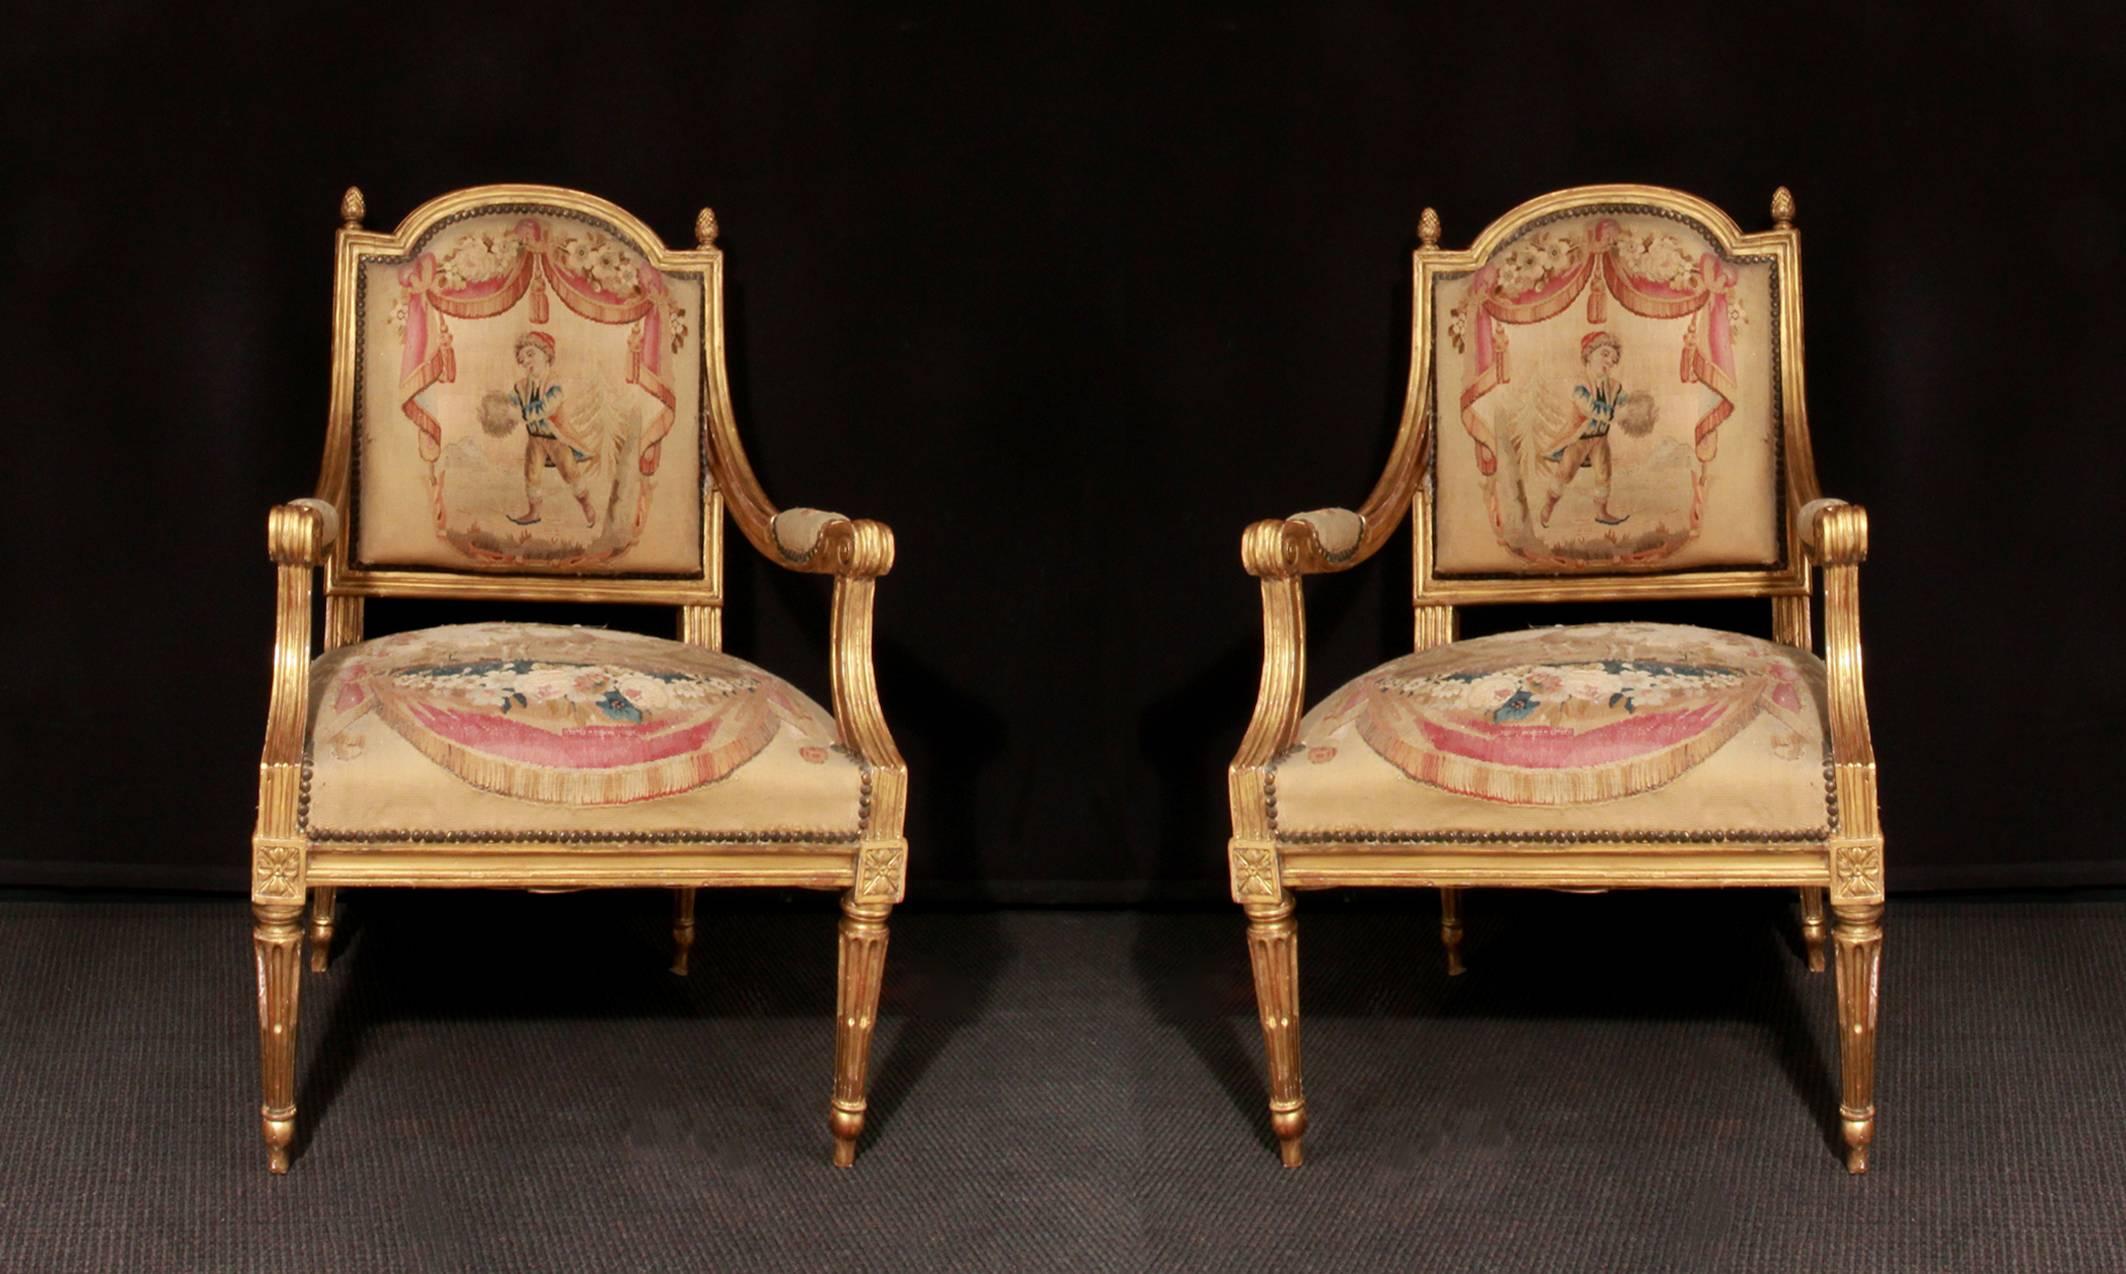 A set of four 18th century, carved giltwood chairs covered with original tapestry, French, circa 1780.

Seat height: 44.5cm. 

Can be sold in pairs (£3500 per pair).